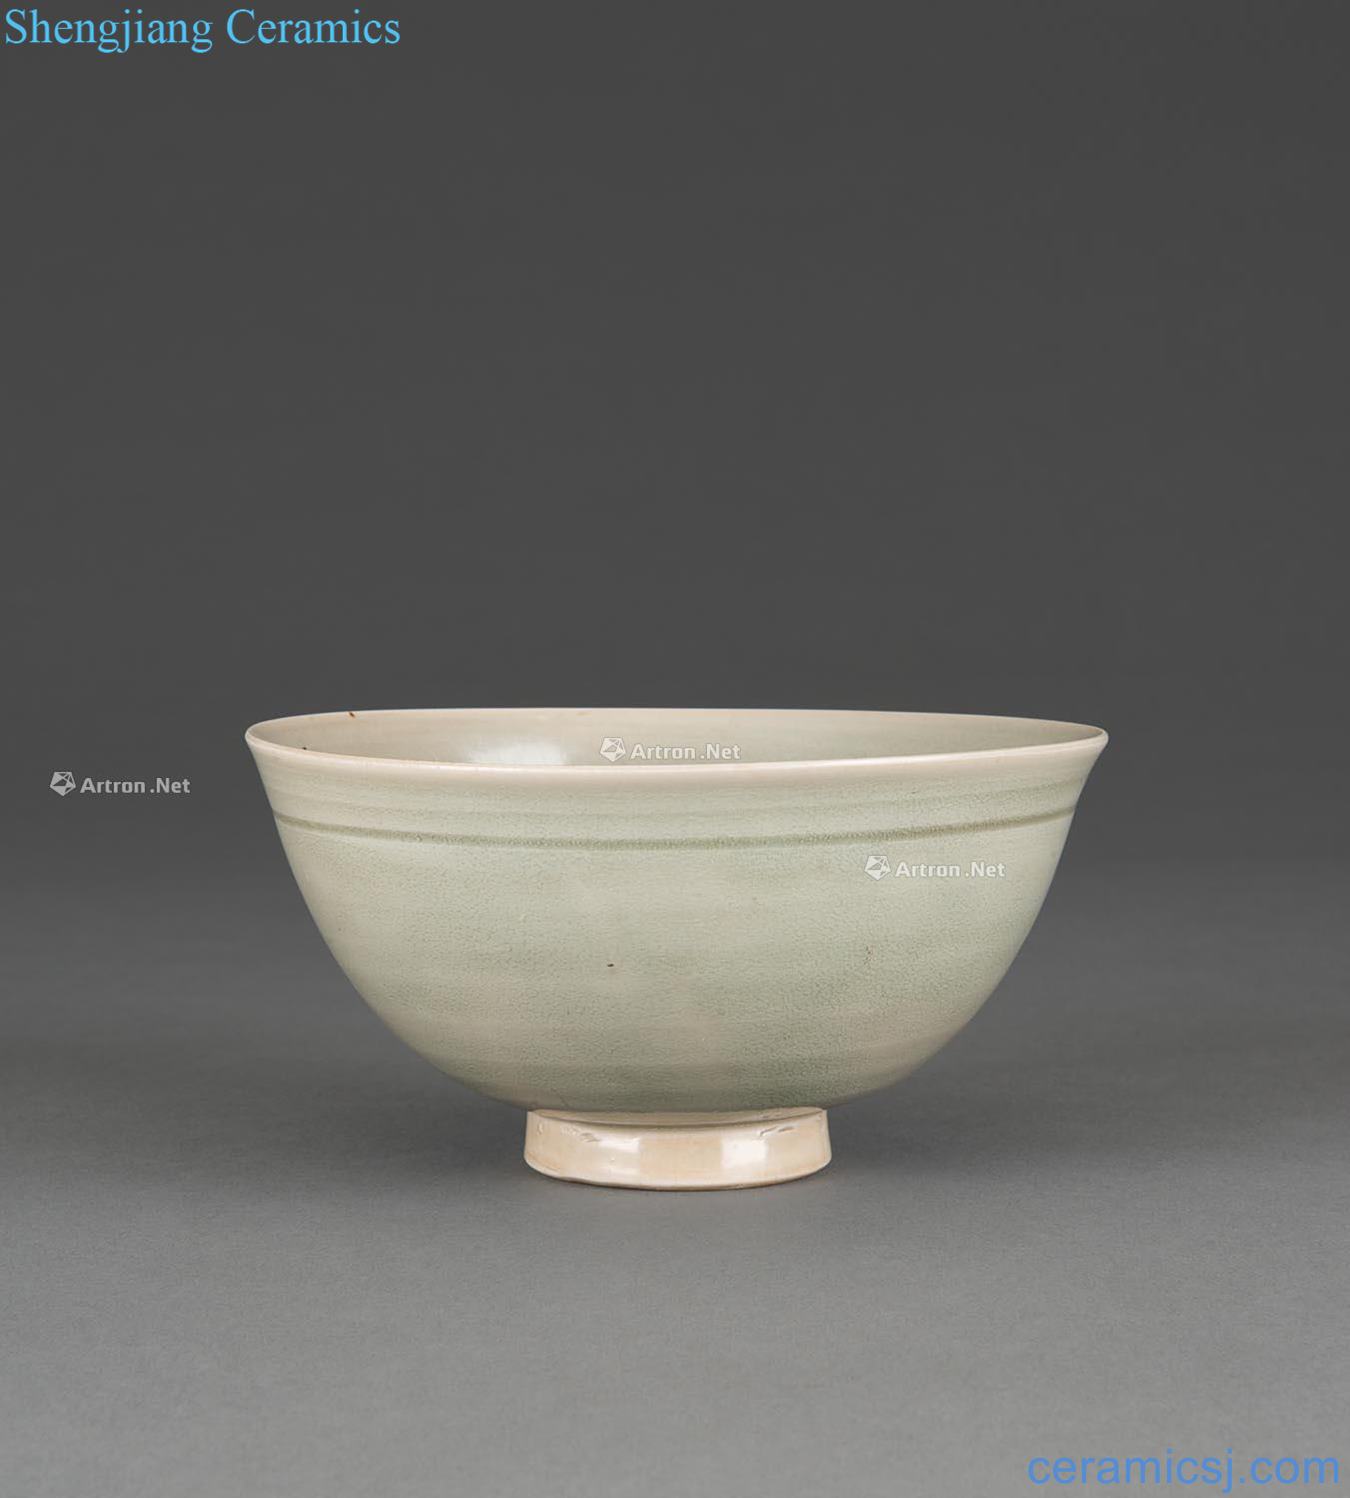 Northern song dynasty yao state kiln oval bowl